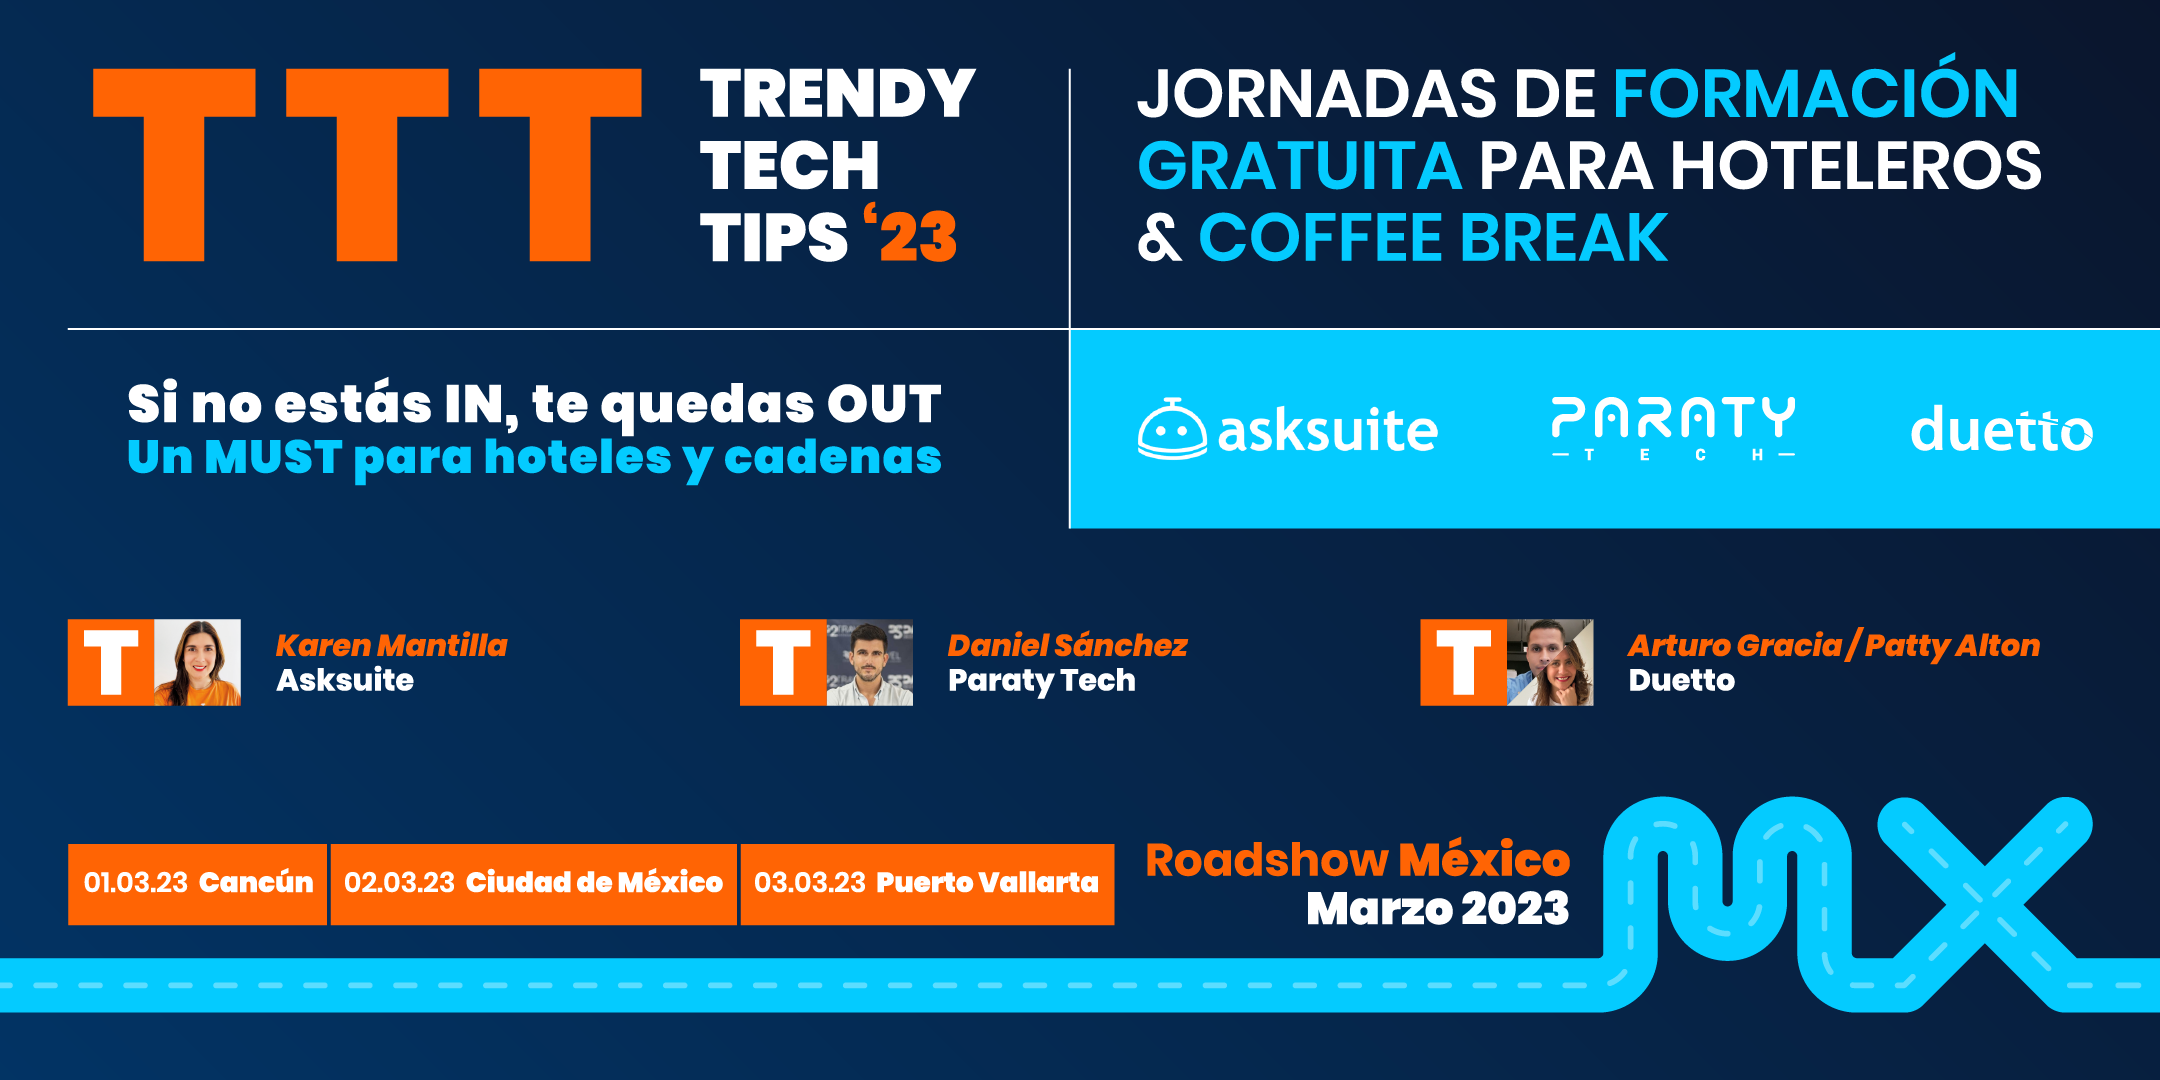 Paraty Tech, Asksuite and Duetto will offer free training for hoteliers in different cities in Mexico the first week of March